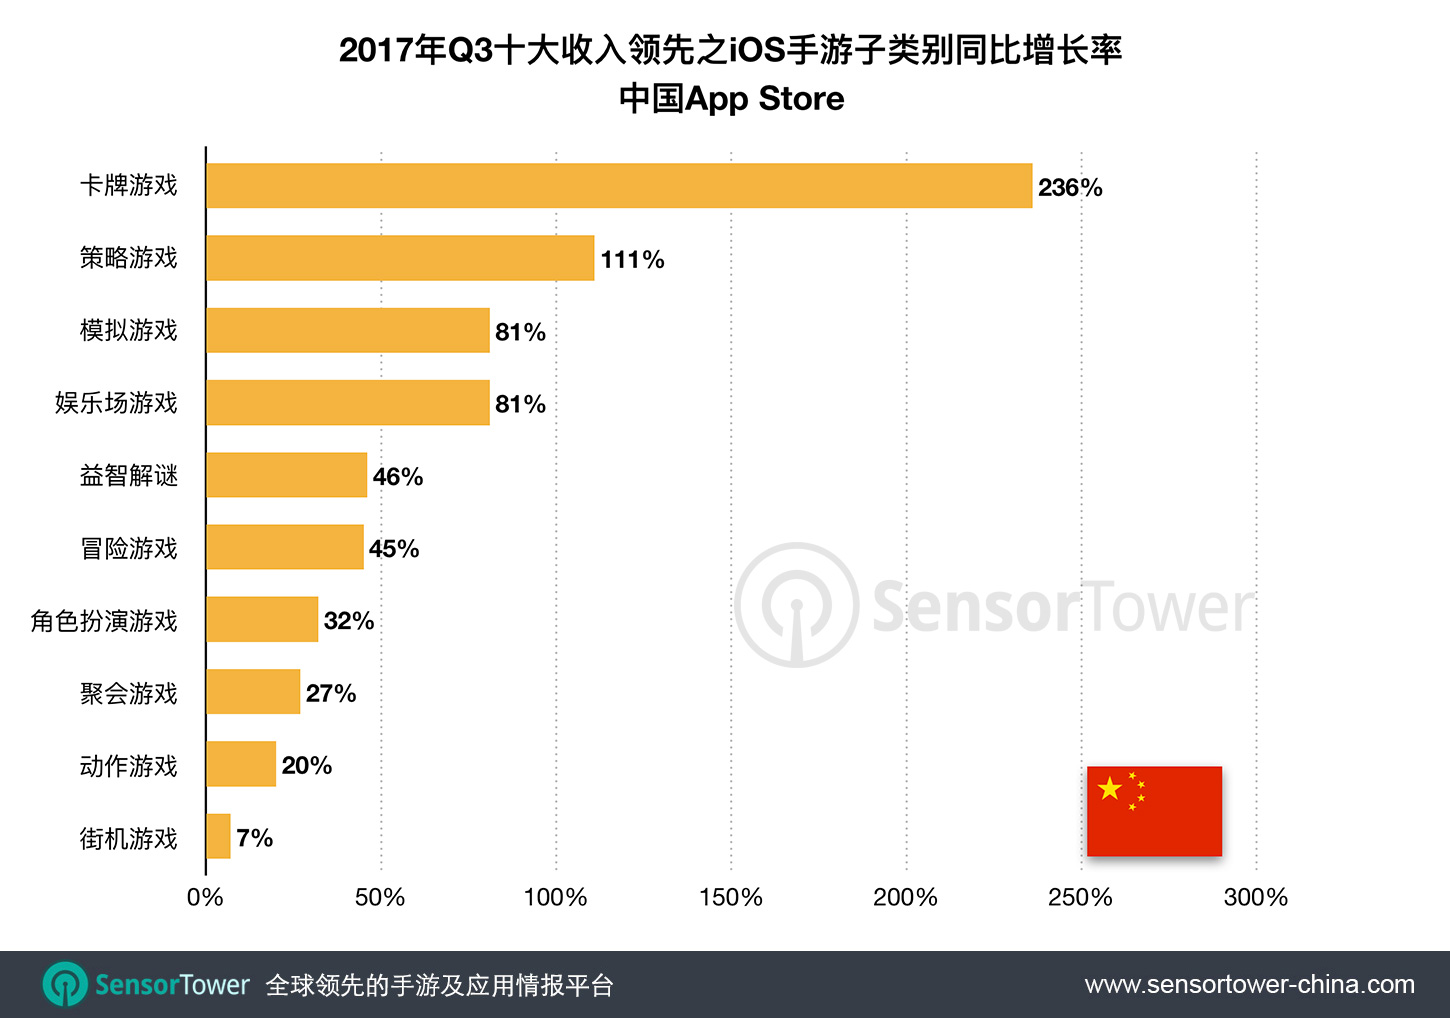 Q3 2017 Top 10 Grossing iOS Game Subcategories YoY Revenue Growth Rates China